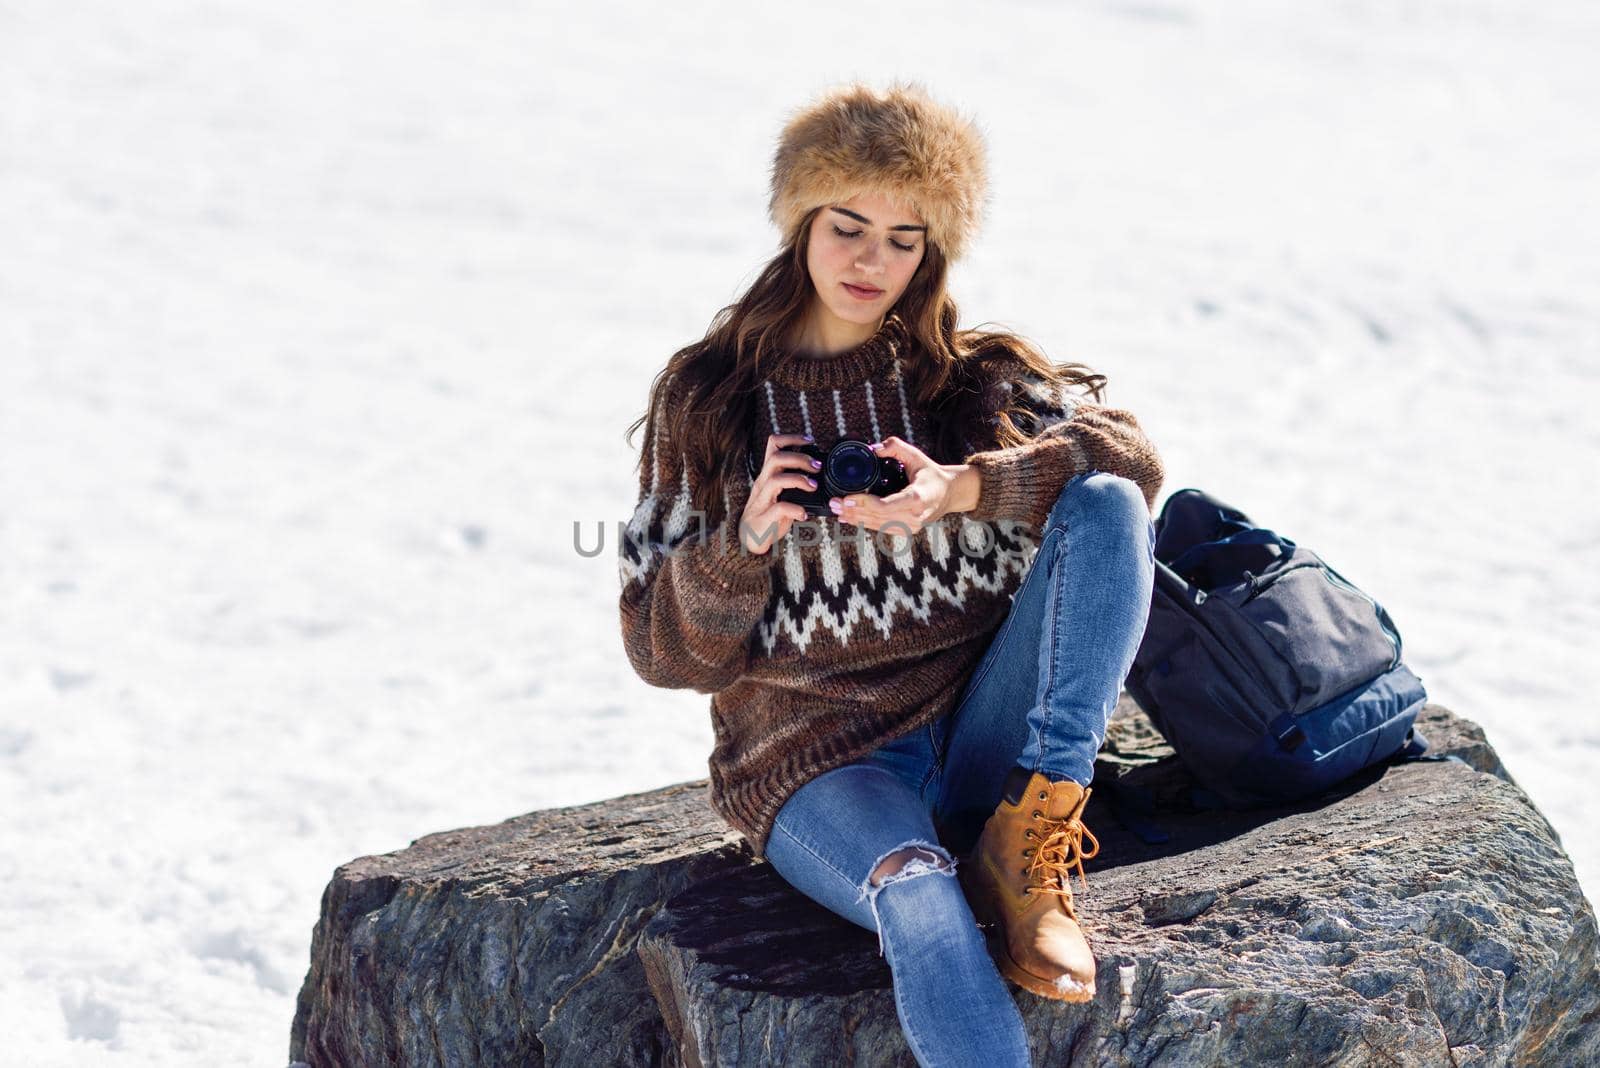 Young woman taking photographs in the snowy mountains in winter, in Sierra Nevada, Granada, Spain. Female wearing winter clothes.